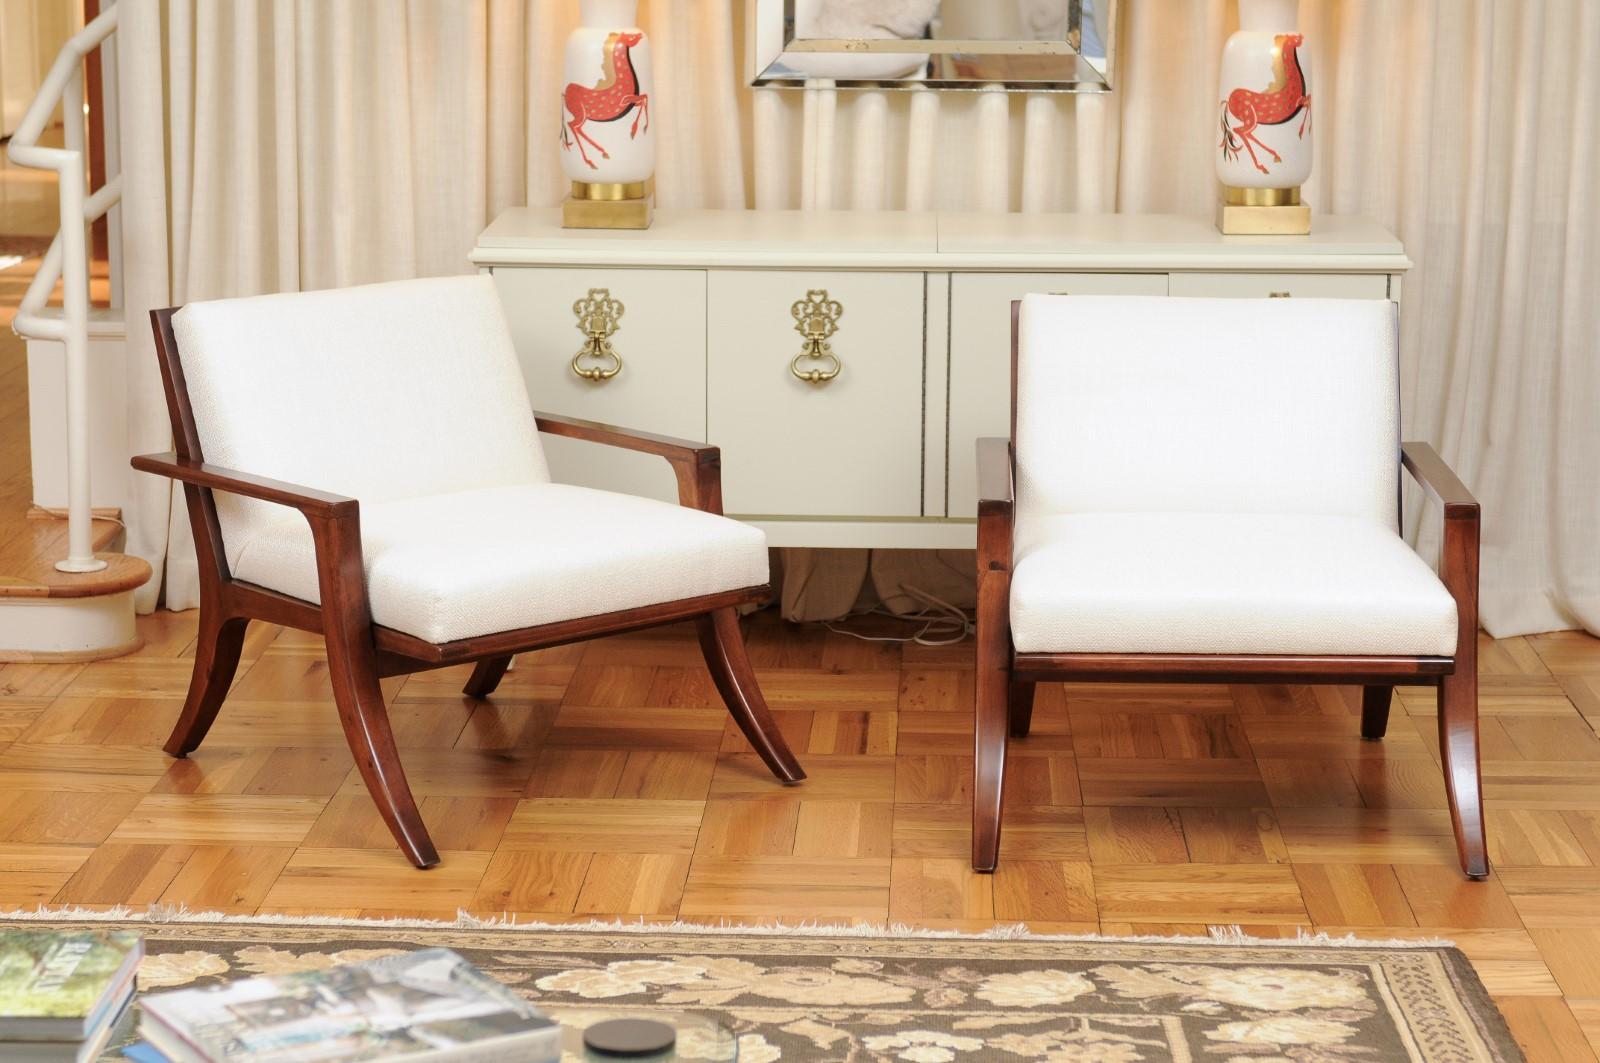 These magnificent lounge chairs are shipped as professionally photographed and described in the listing narrative: Meticulously professionally restored and installation ready. Expert custom upholstery service is available.

A fabulous restored